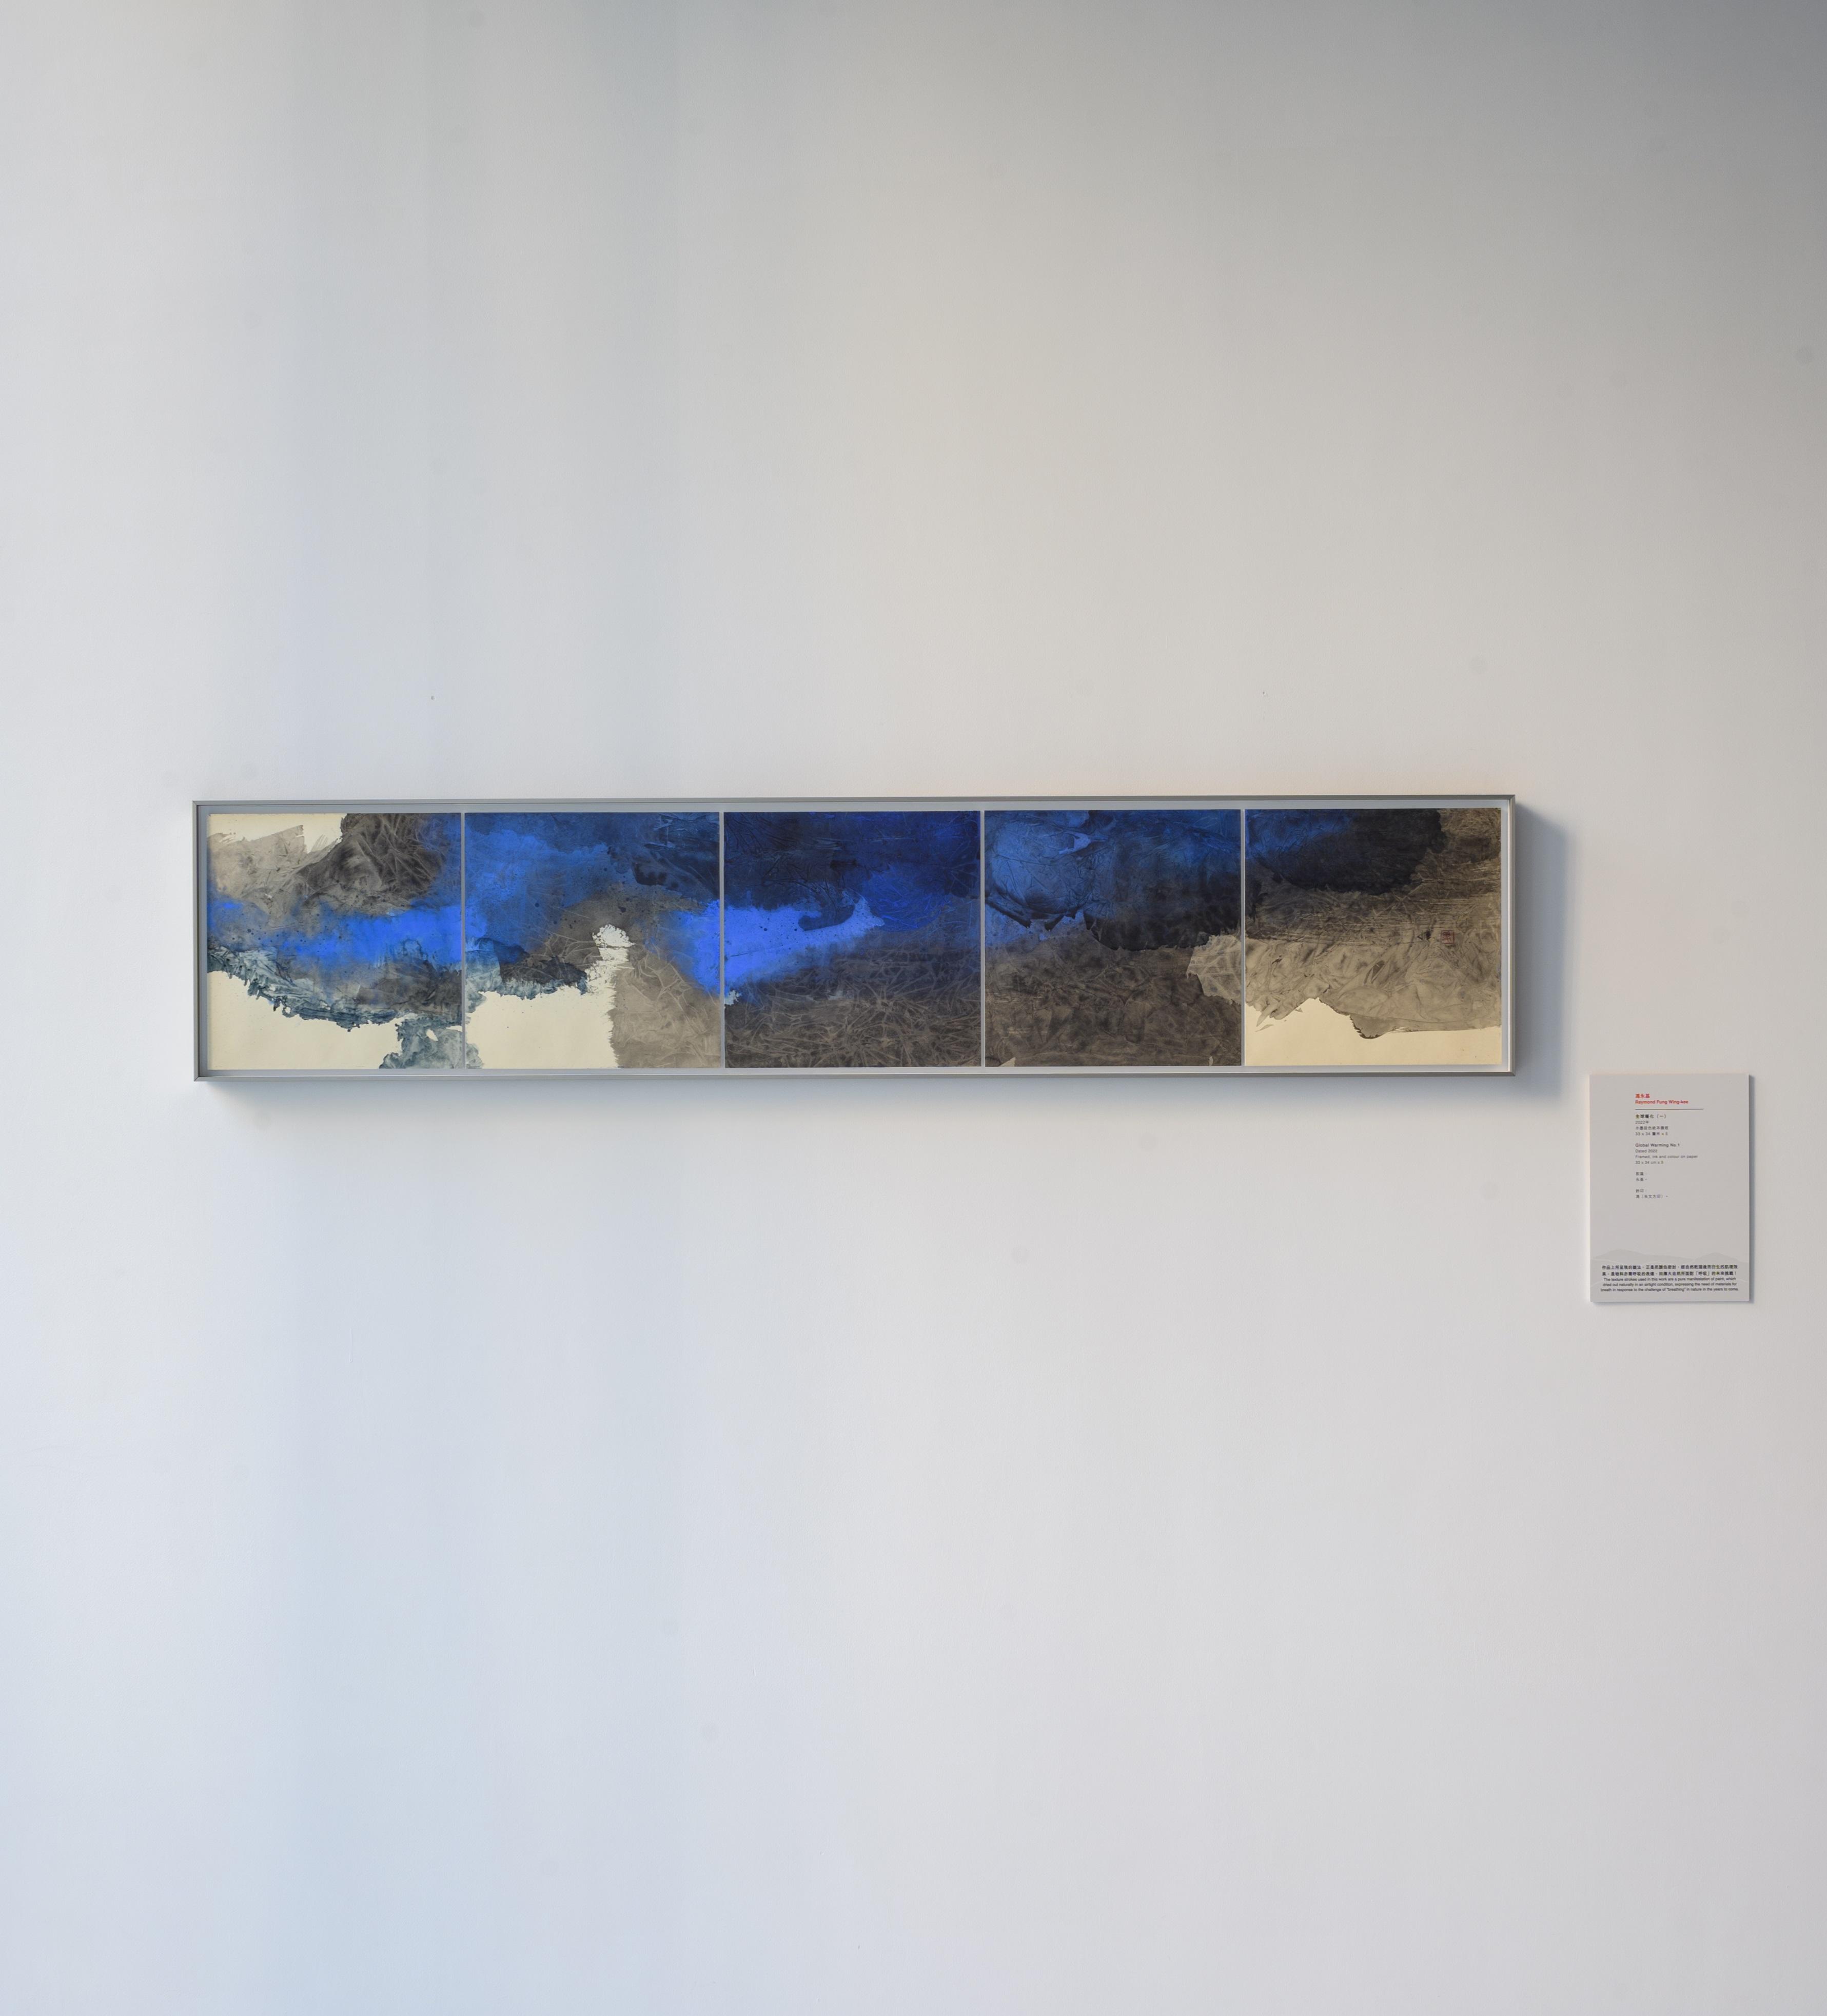 Archaic Curator Series: Seon1 - Cultural Symbols of Chinese Landscape Painting will be on display at Oi! Glassie from today (December 9). Photo shows artist Raymond Fung Wing-kee's artwork "Global Warming No.1"